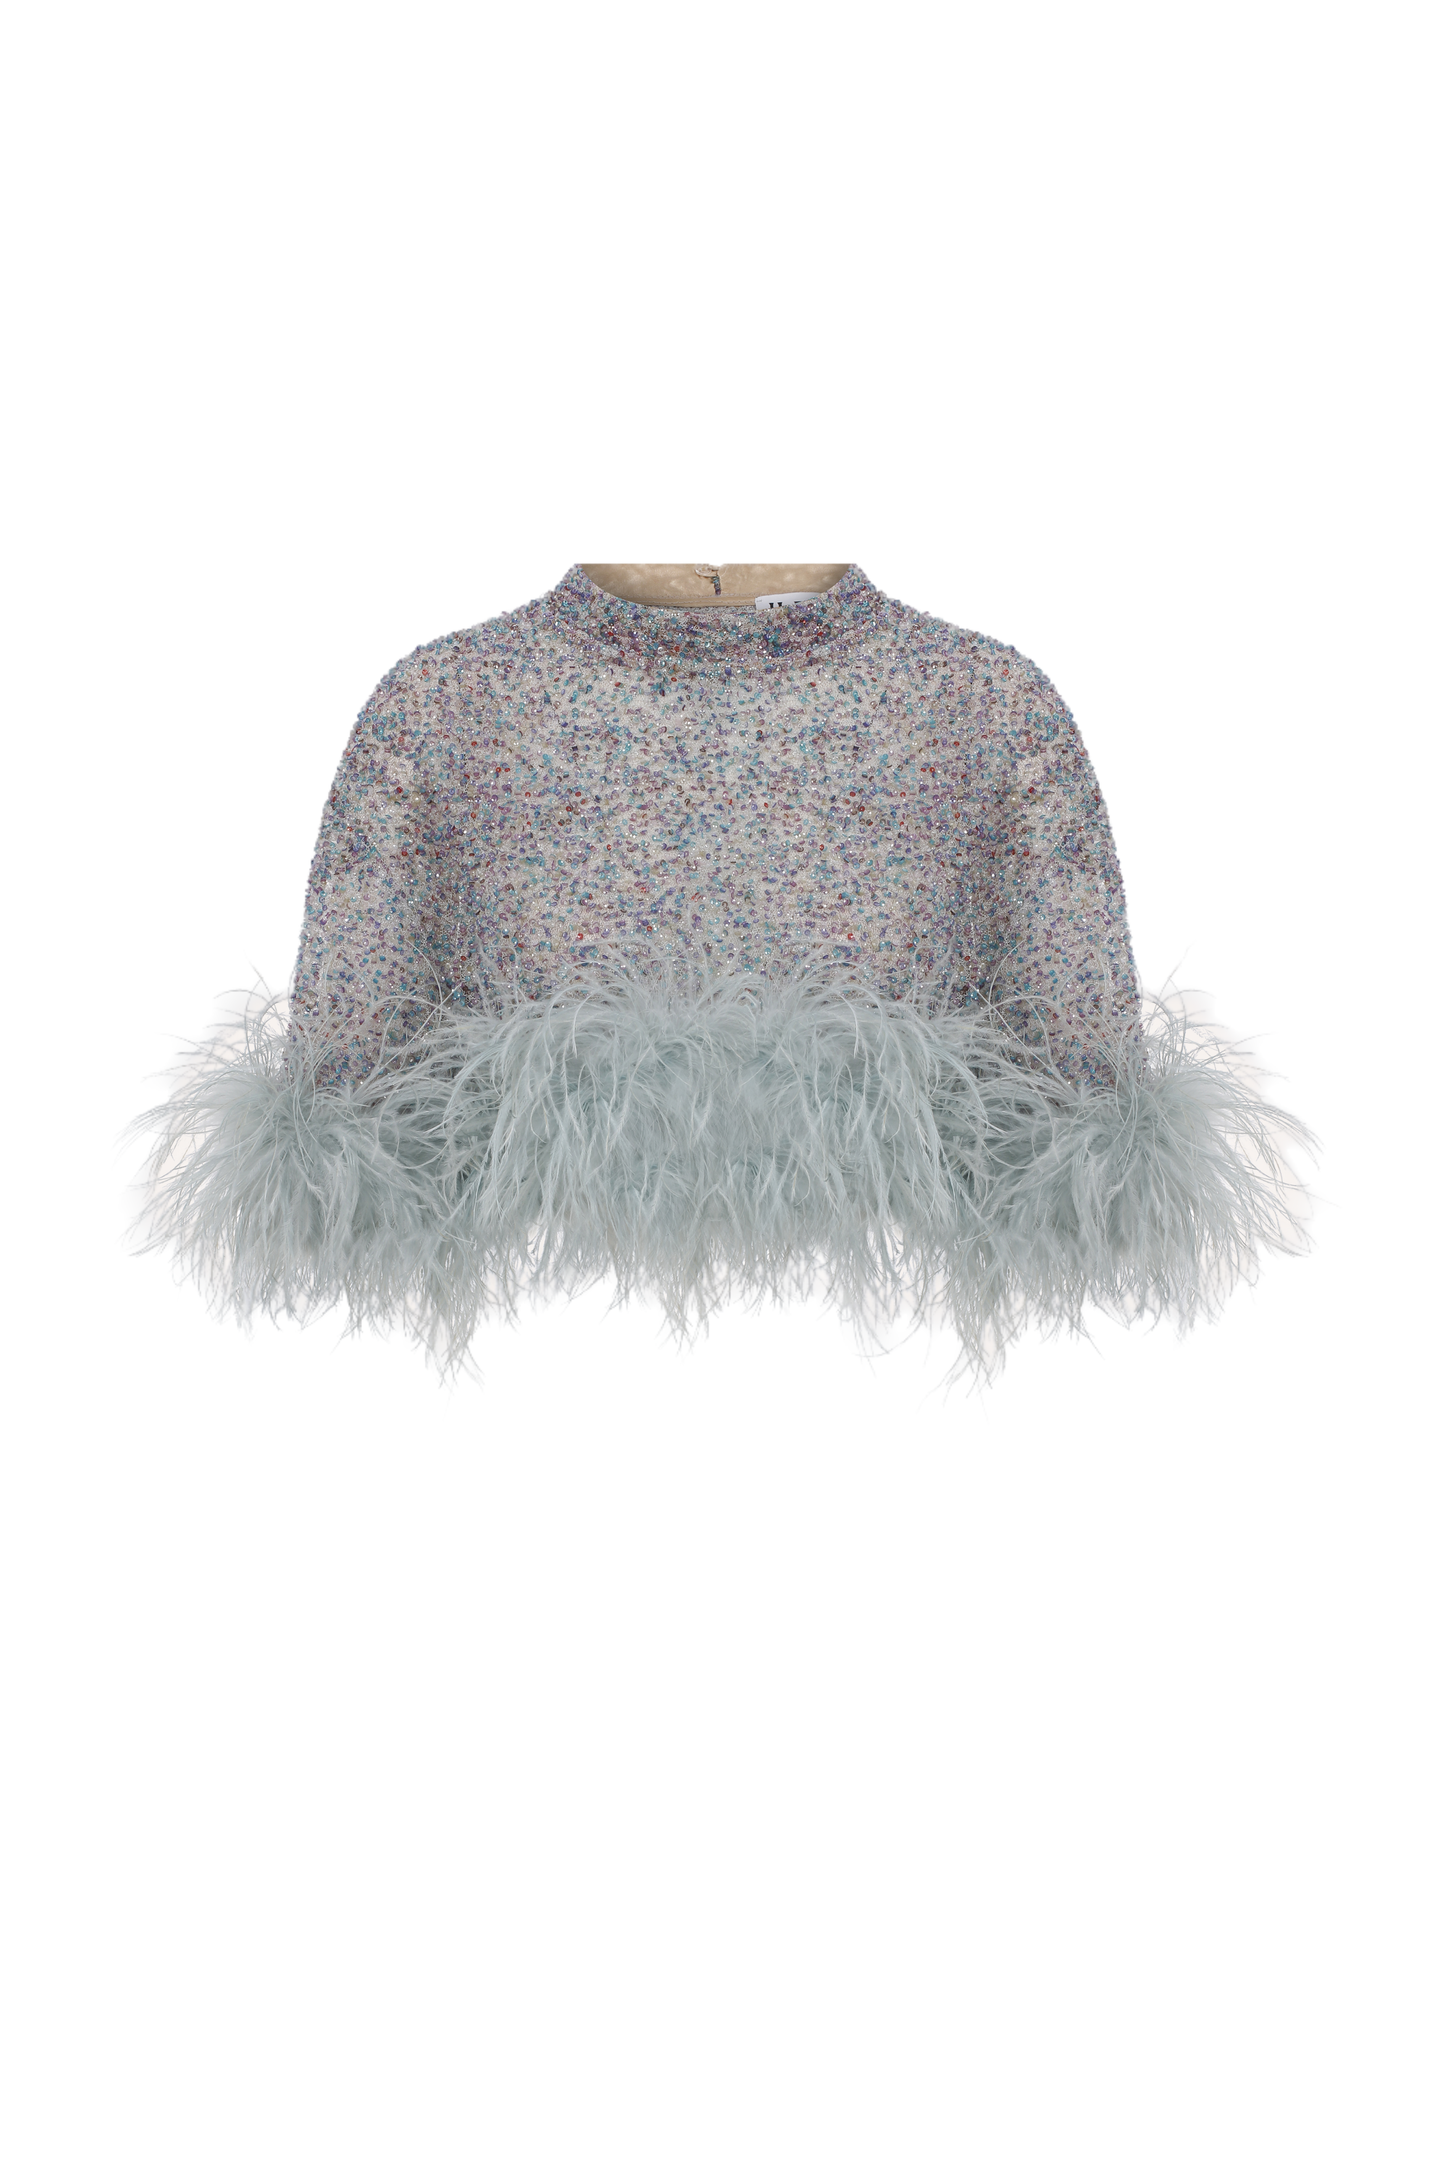 Camille - Crop Top Tshirt With Feathers